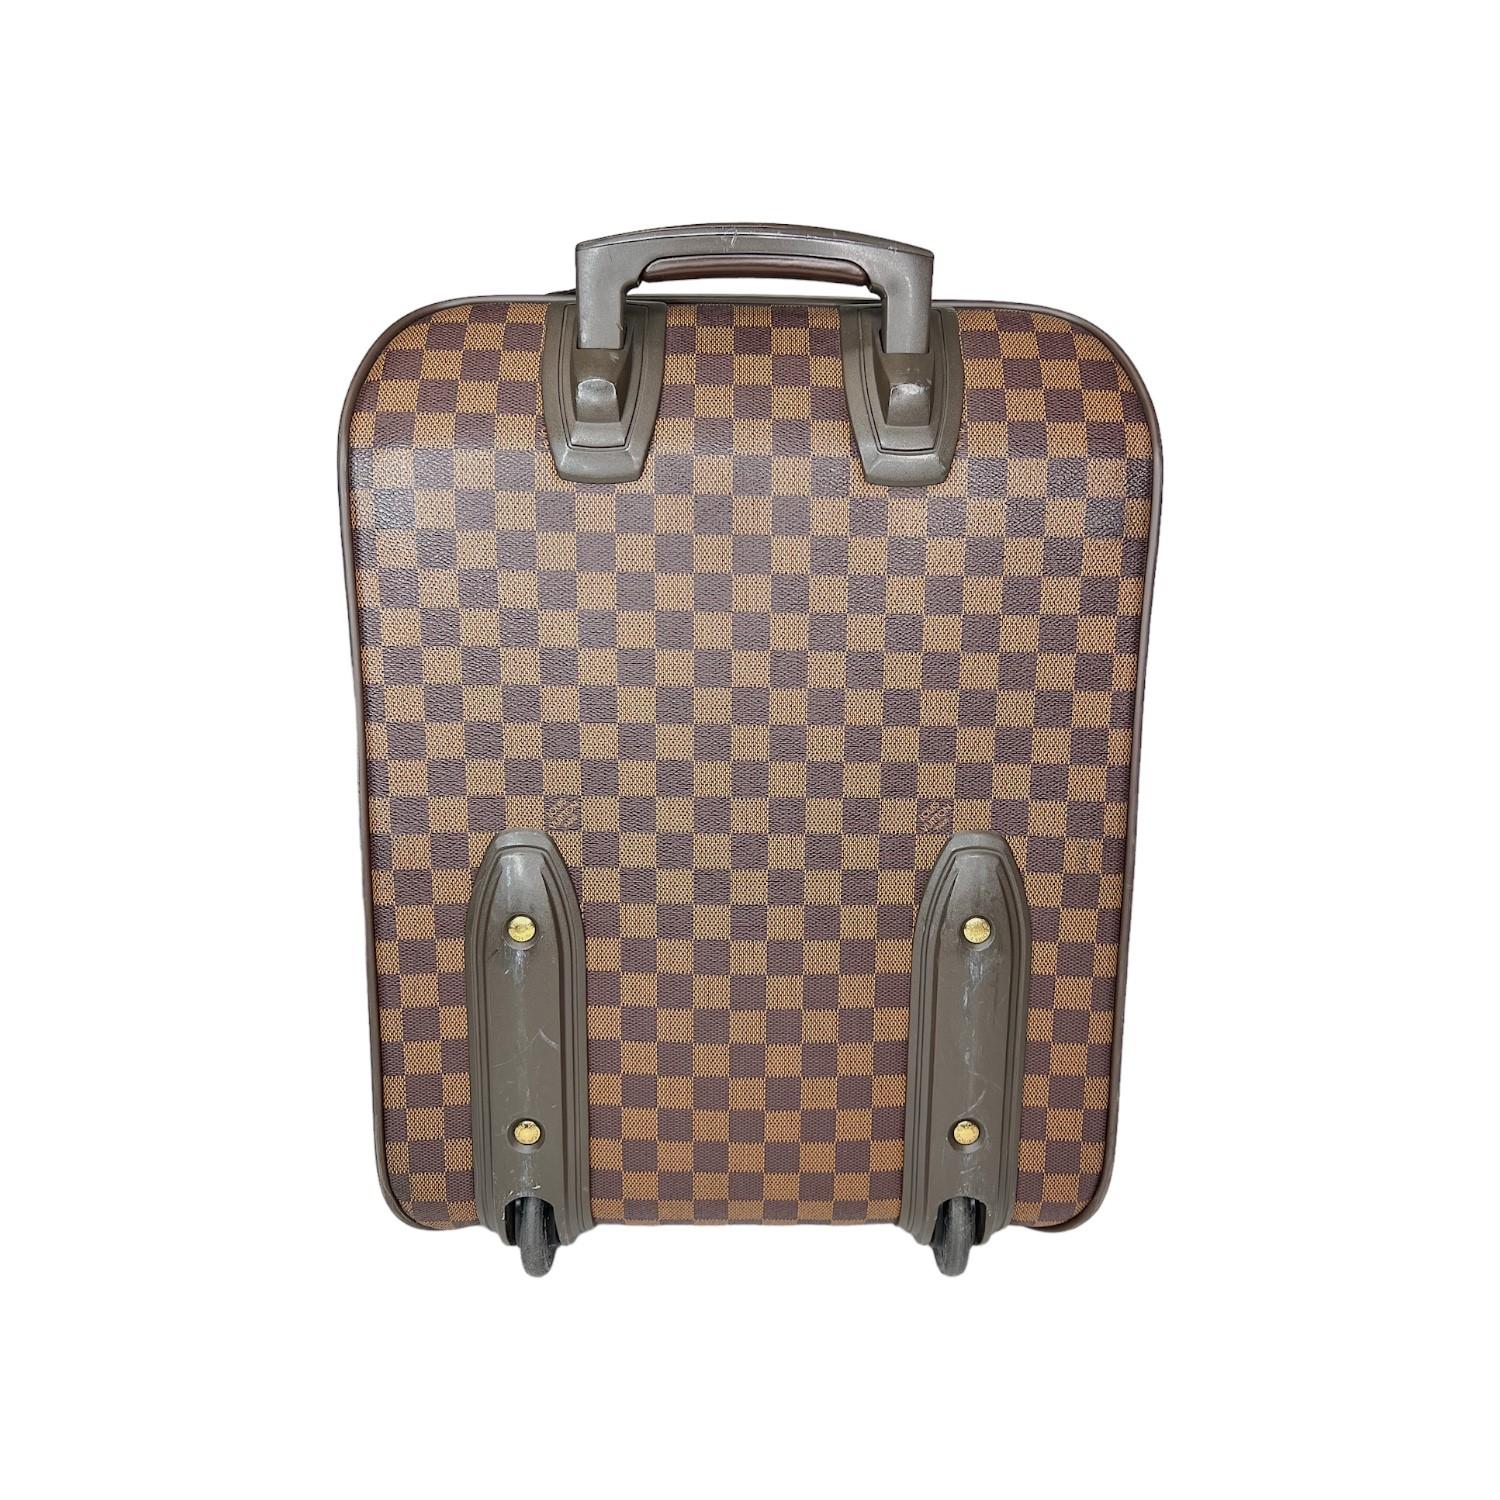 This Louis Vuitton Damier Ebene Pegase 45 was made in France in 2002 and it is finely crafted of the classic Louis Vuitton Damier Ebene coated canvas exterior with leather trimming and gold-tone hardware features. It has a flat leather top handle